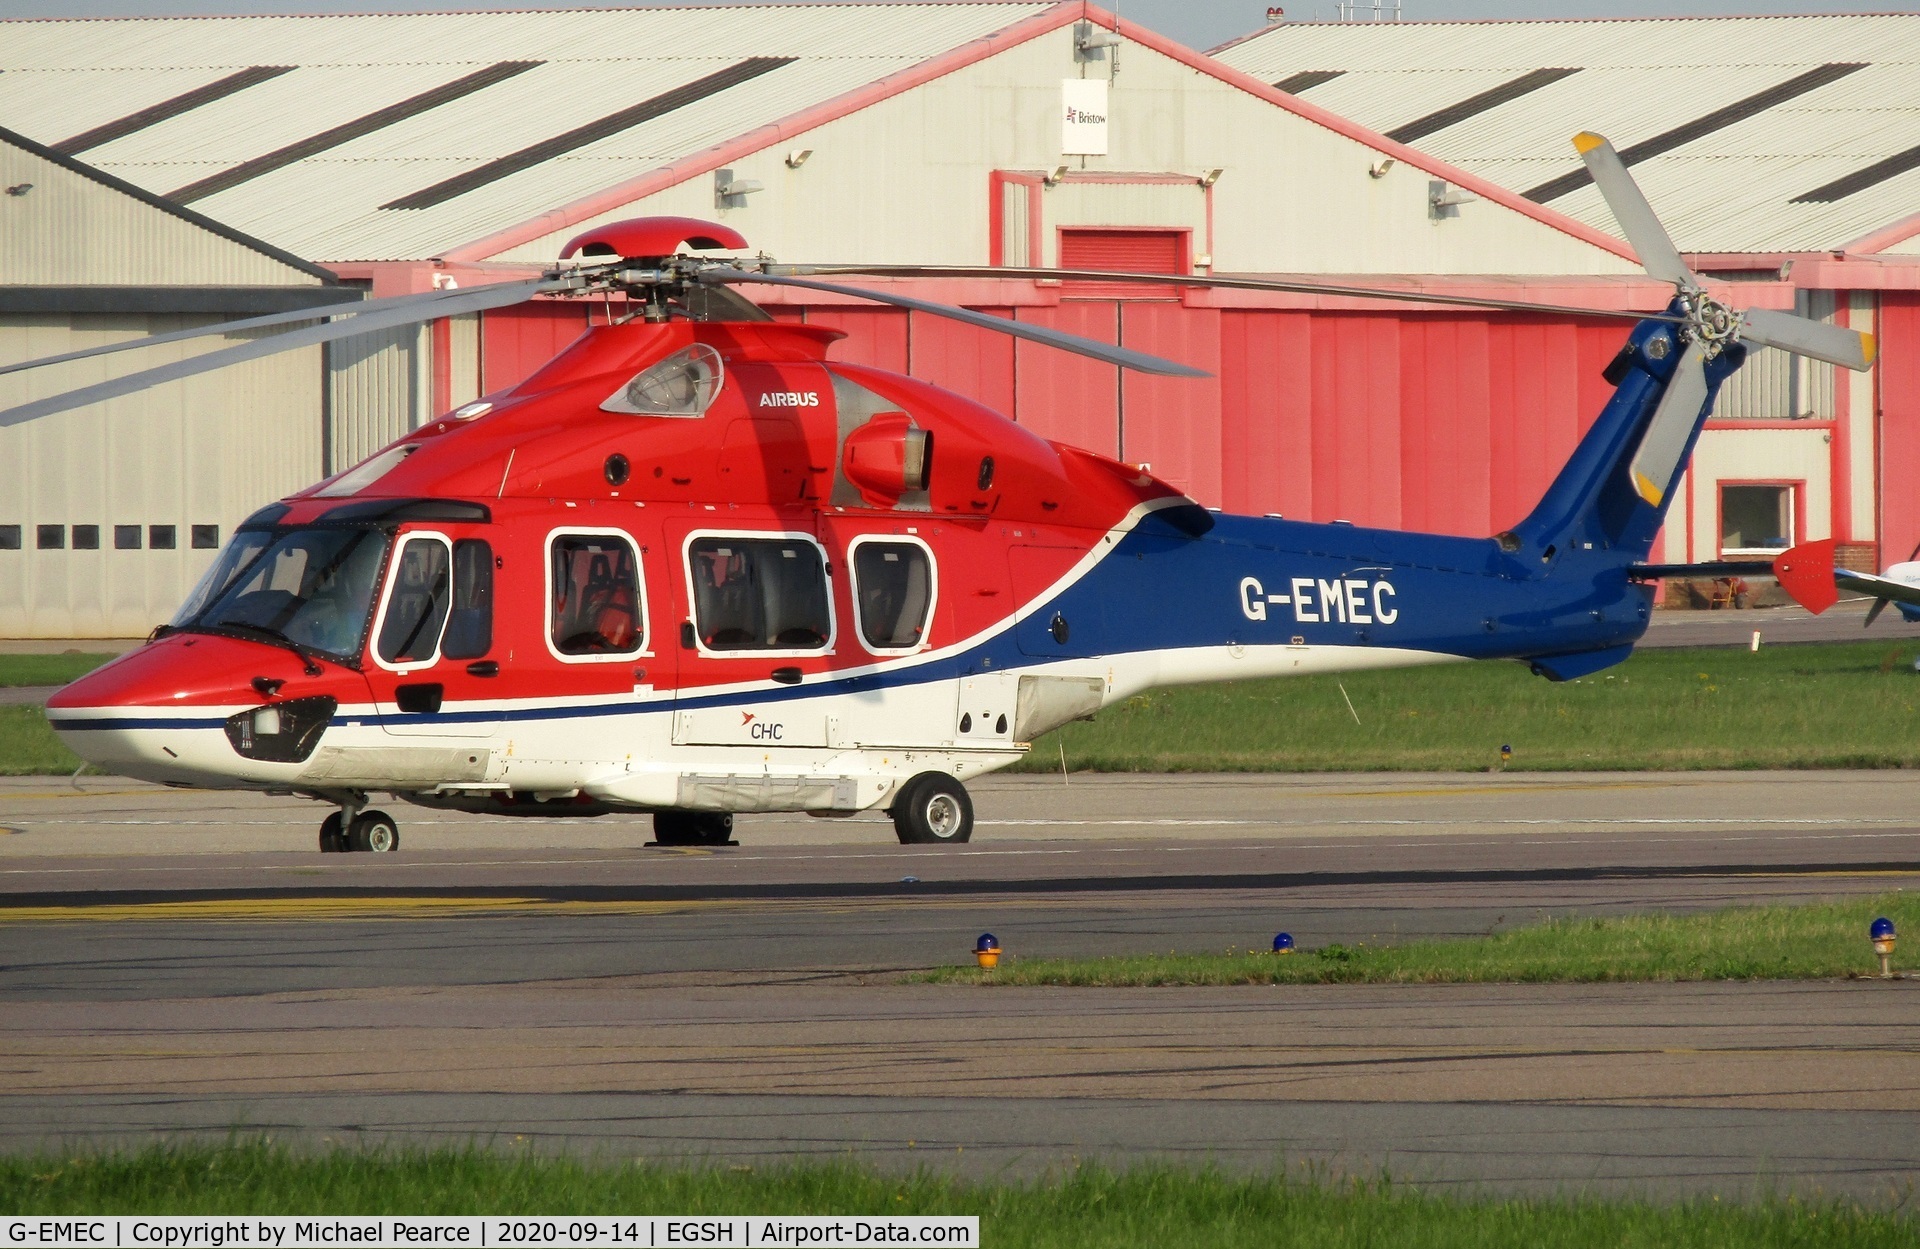 G-EMEC, 2018 Airbus Helicopters EC-175B C/N 5031, Parked at SaxonAir prior to the day's flights.